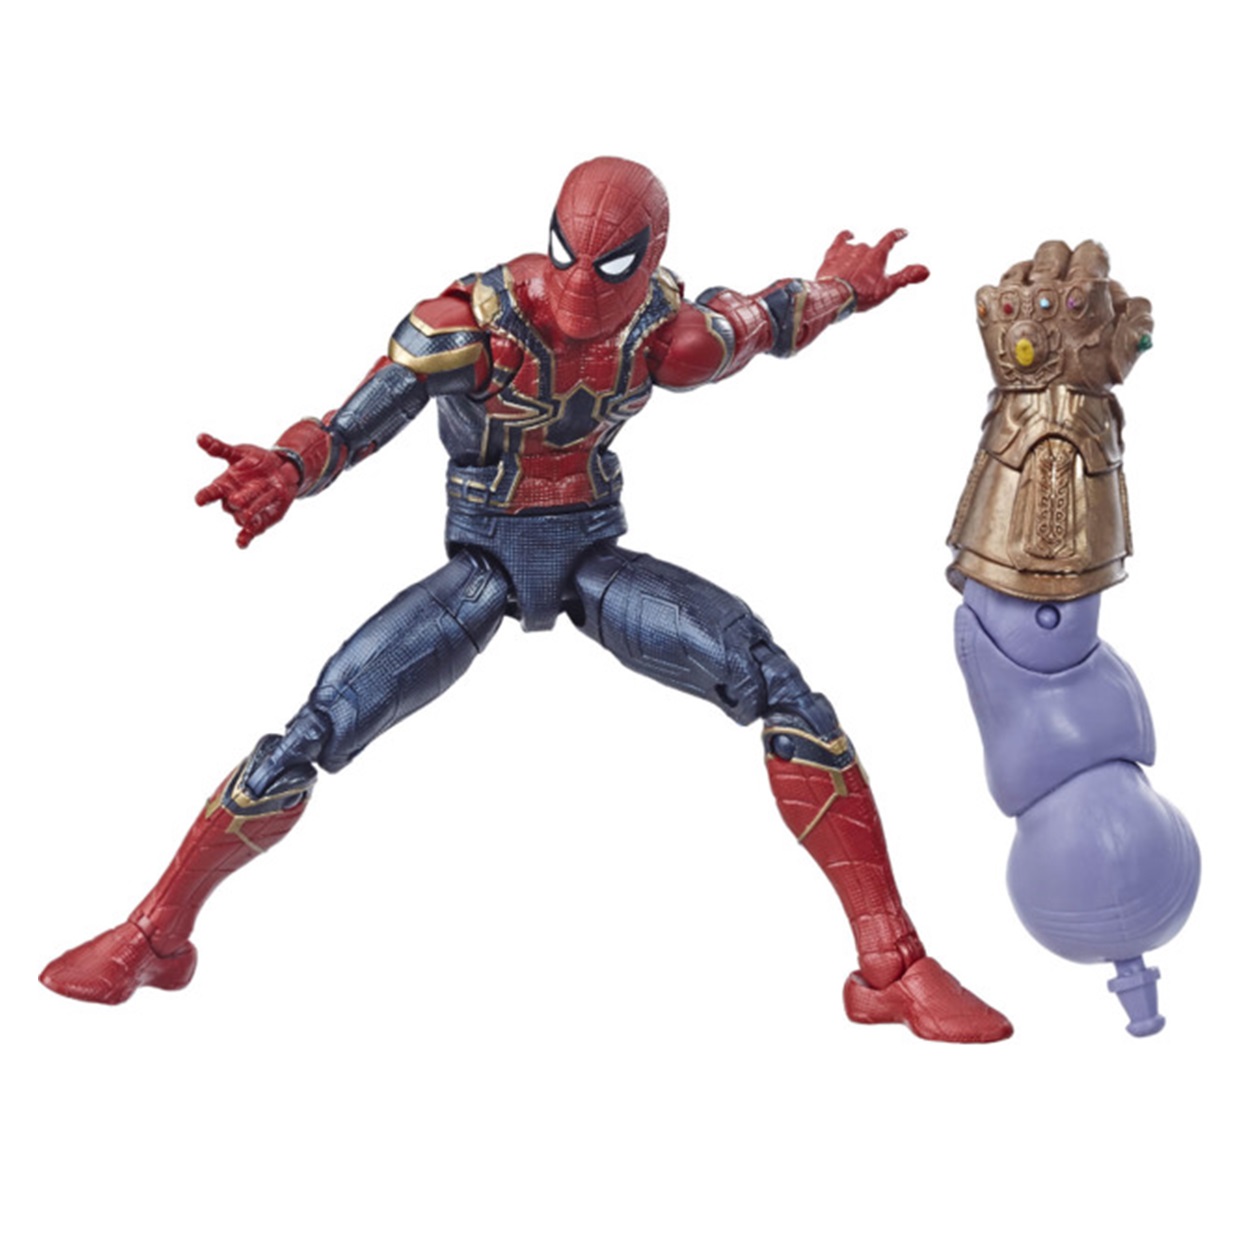 Iron Spider Figura Avengers End Game B A F Thanos Legends